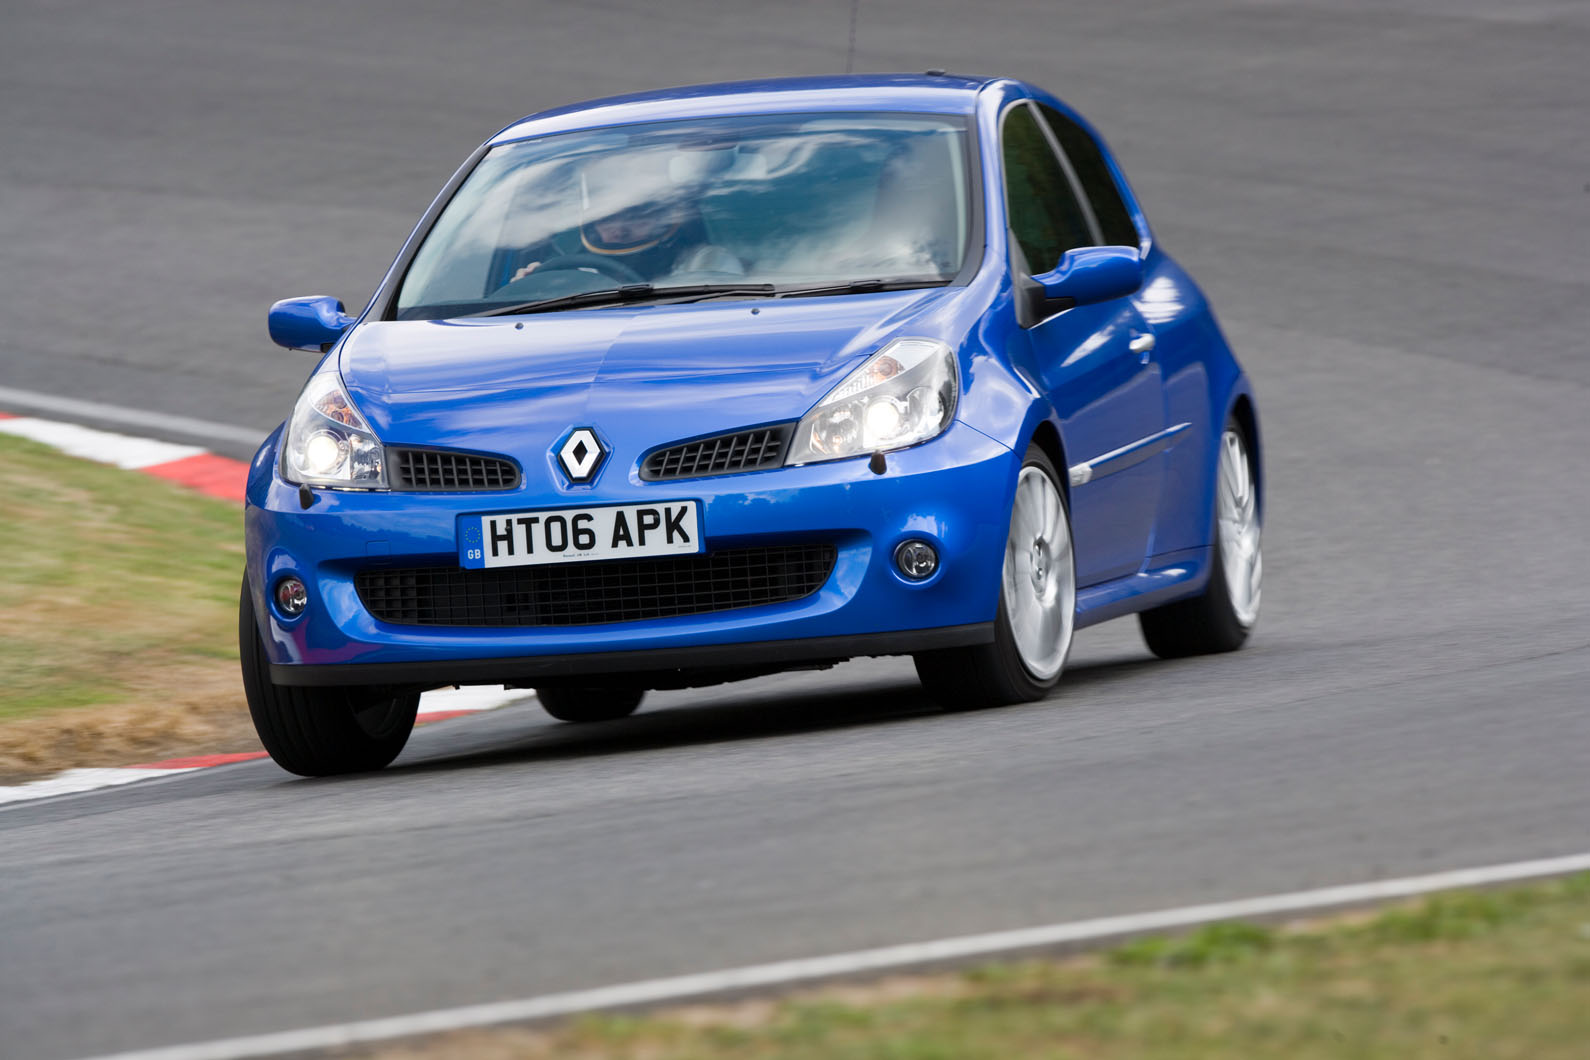 used-car-buying-guide-renaultsport-clio-197-autocar